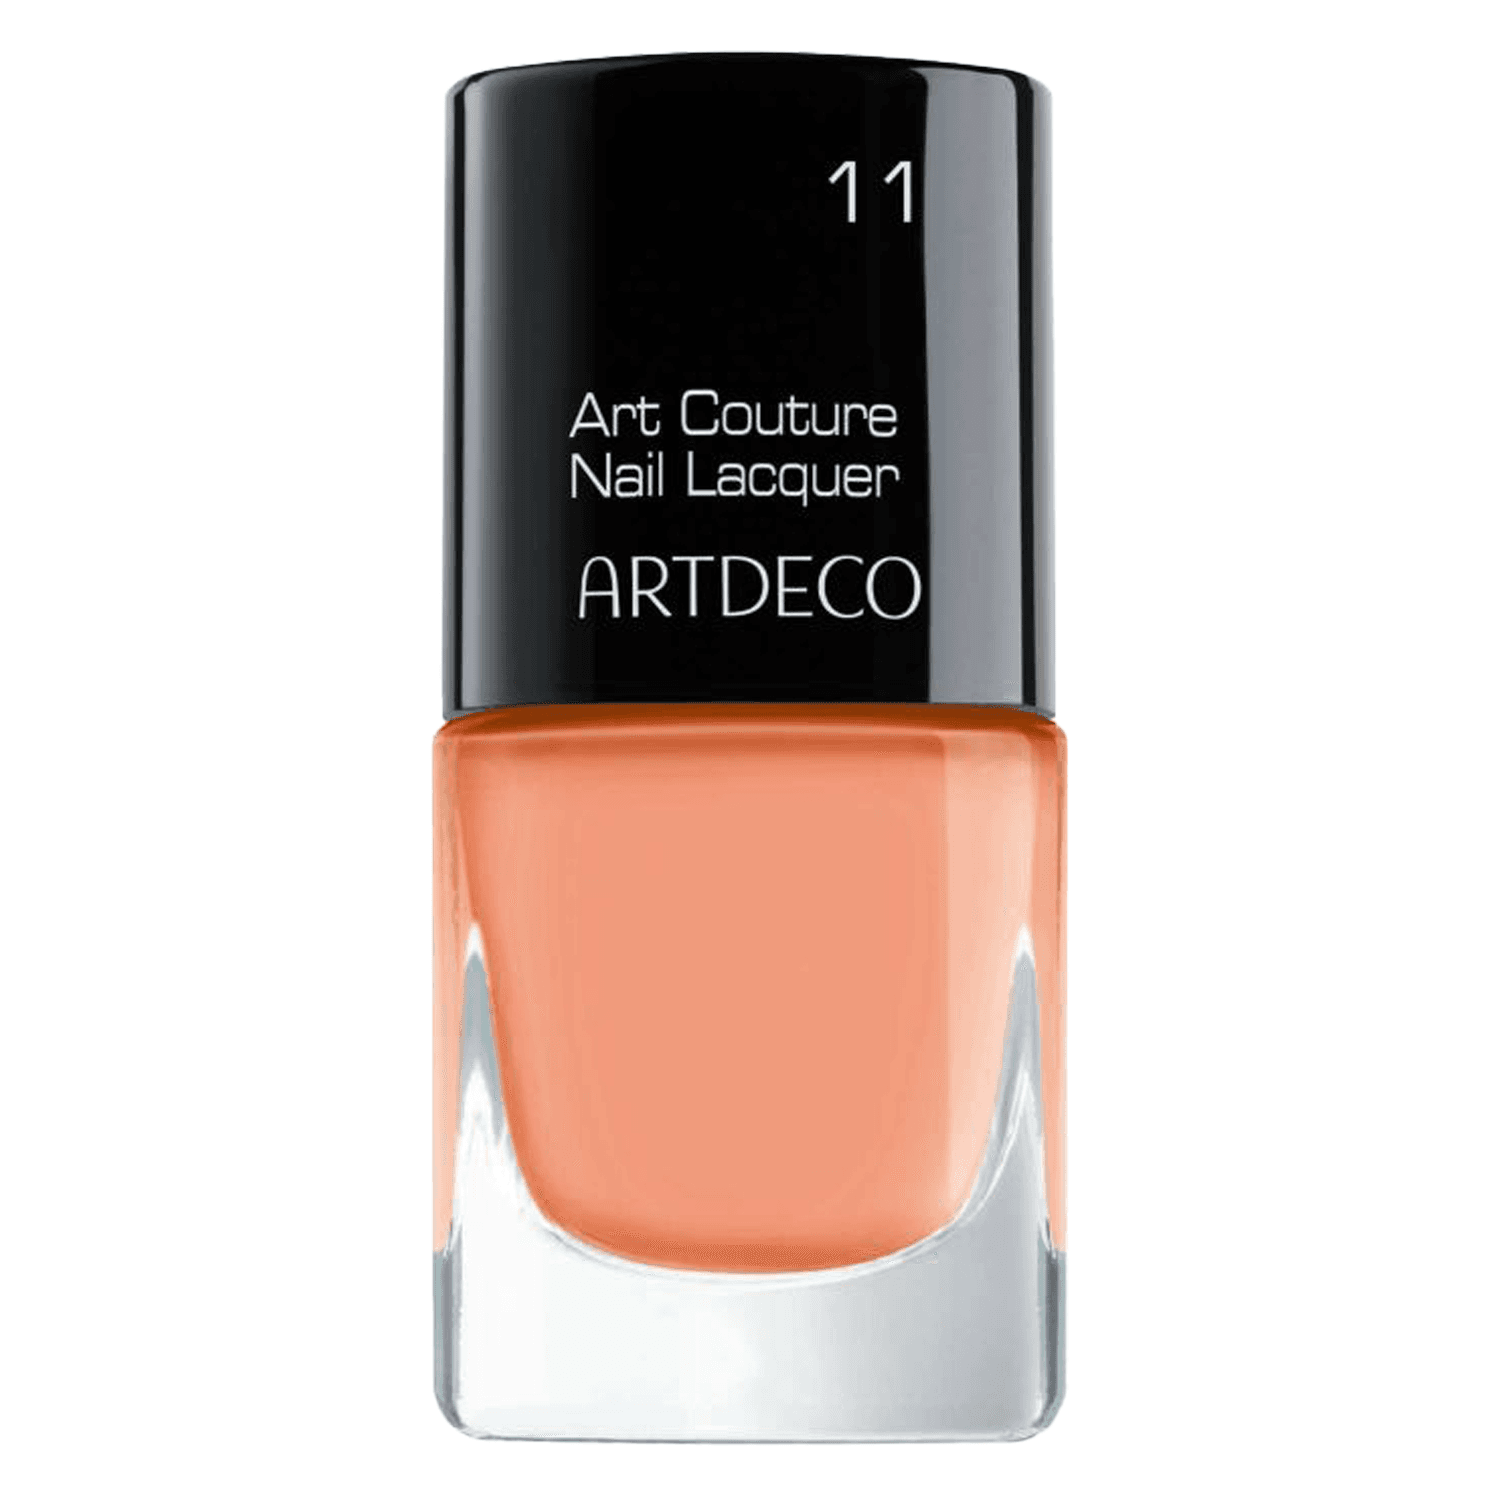 Art Couture - Nail Lacquer Marigold 11